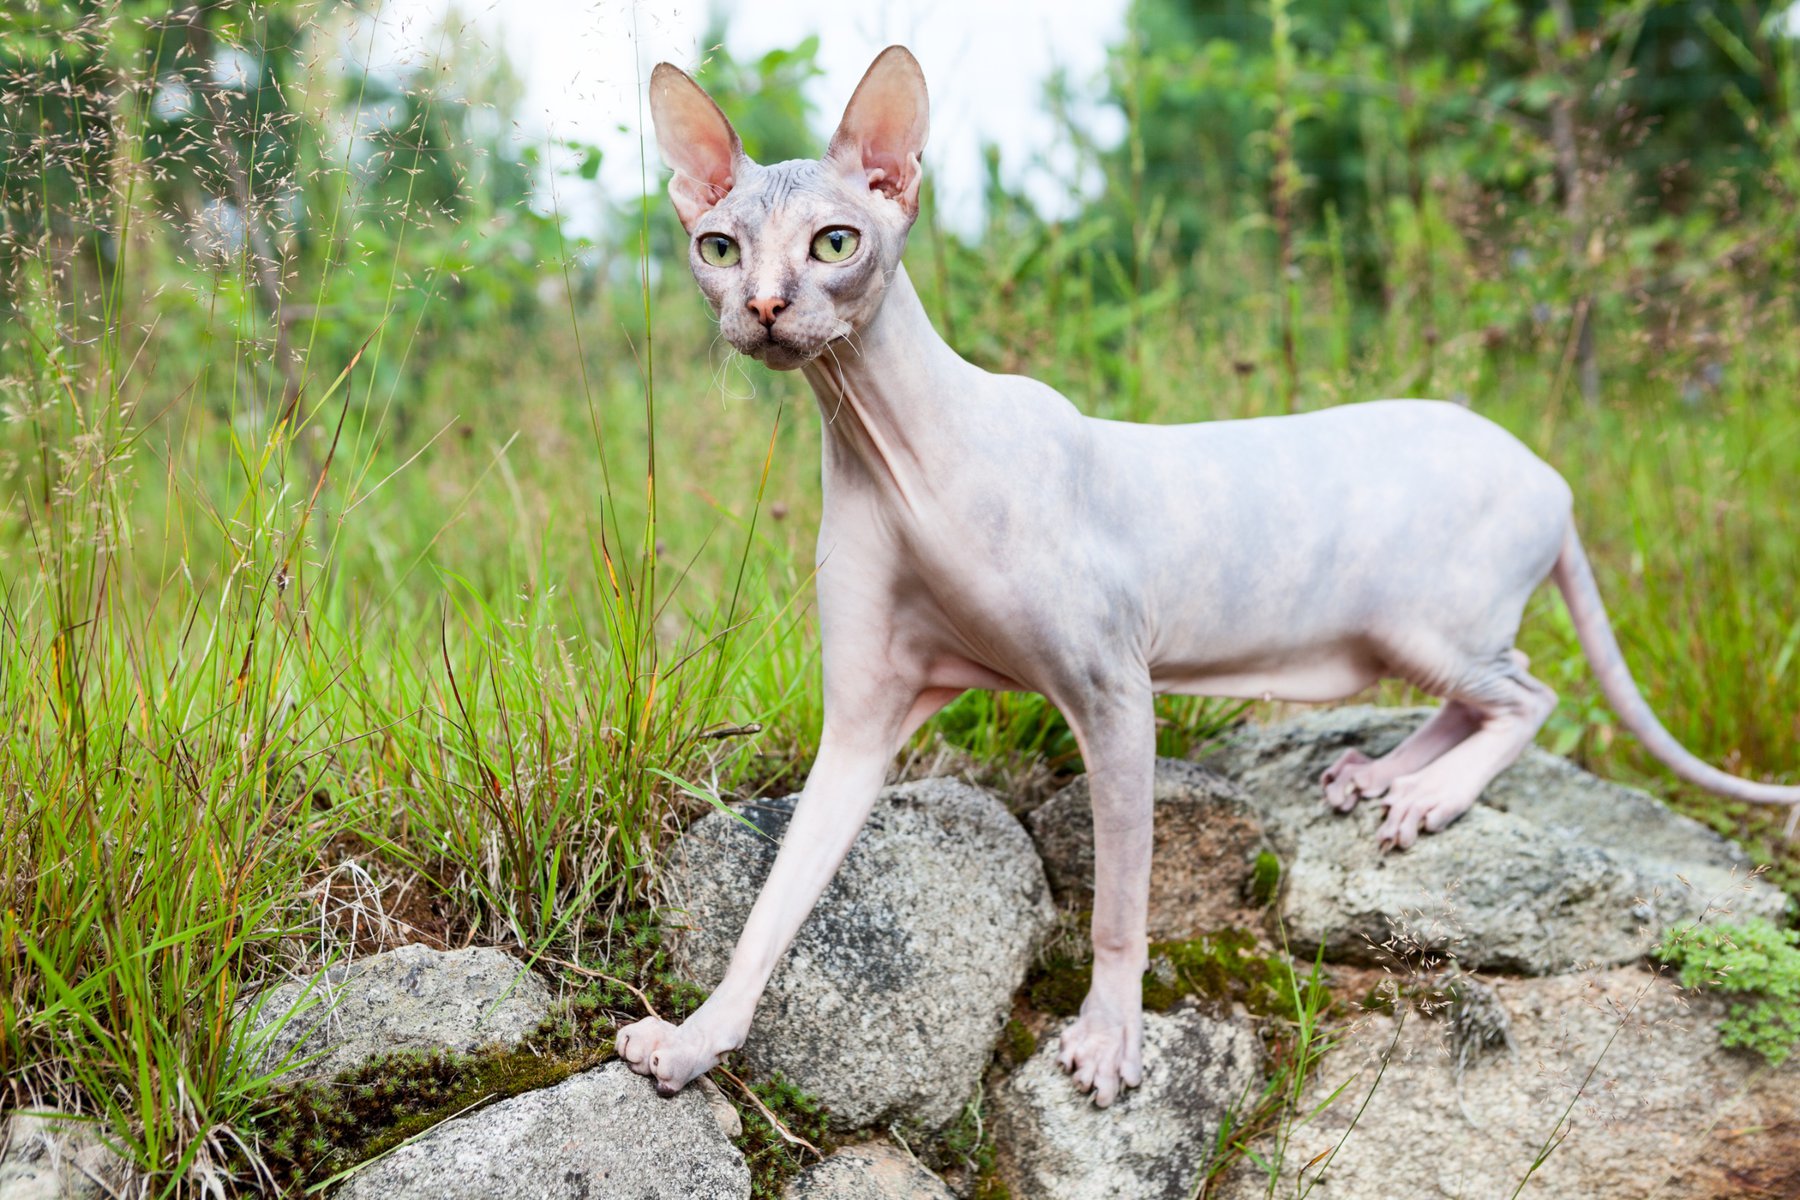 Don sphynx cat standing on stones with wide open eyes and stretching long neck